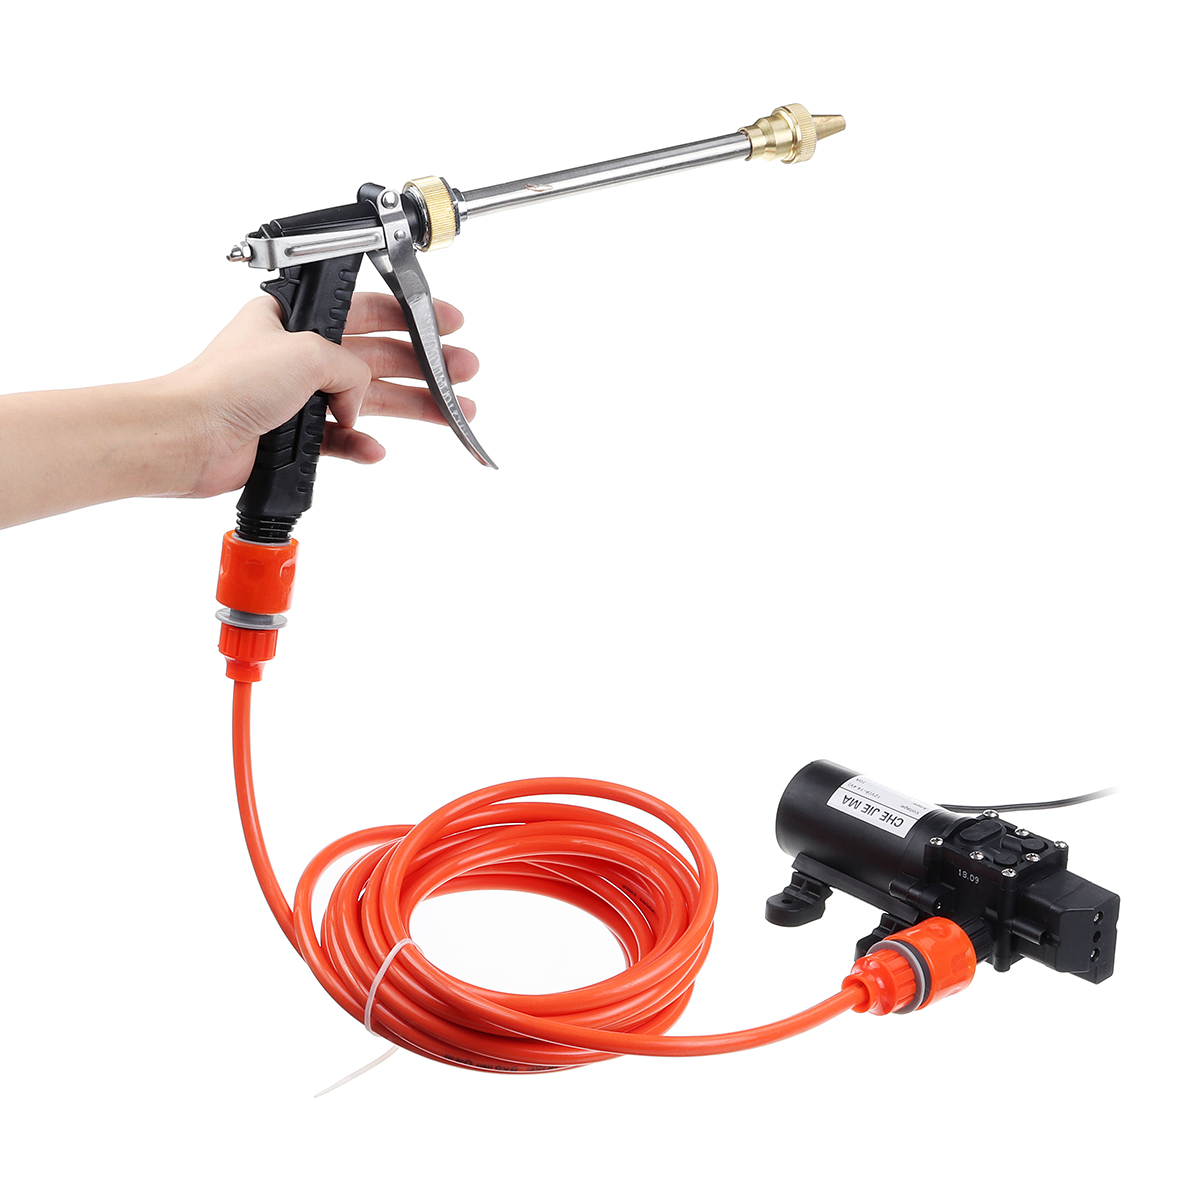 

12v 100W 200PSI Car Wash Pump Sprayer Kit Tool High Pressure Self-Priming Auto Washer Sprayer Cleaning Set with Spray G-